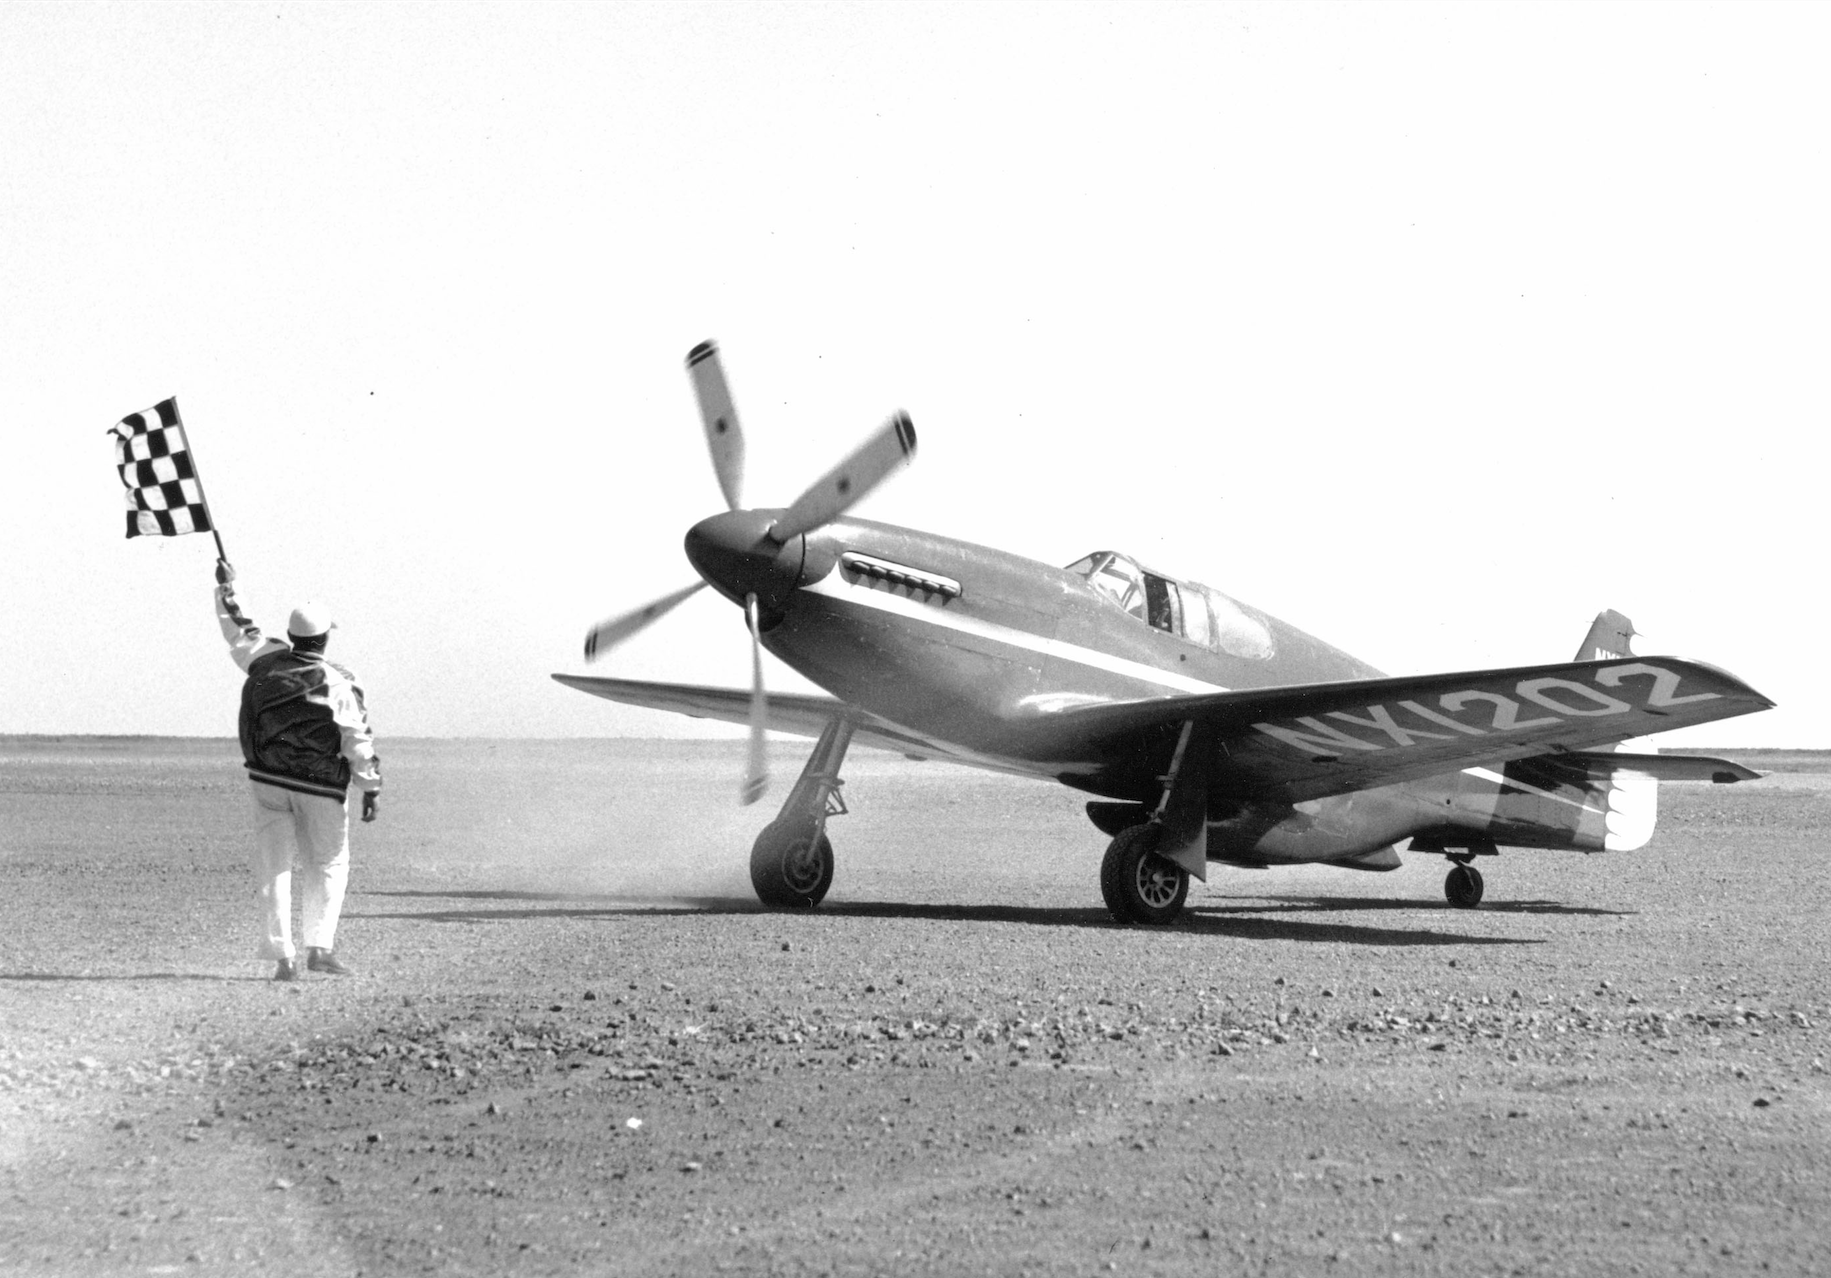 Test pilot Herman “Fish” Salmon awaits the starter’s signal at the beginning of the 1949 Bendix Trophy Race on Rosamond Dry Lake, California. Paul Mantz had won the 1946 and 1947 races with this P-51C, NX1202, “Blaze of Noon.” (San Diego Air and Space Museum Archive)